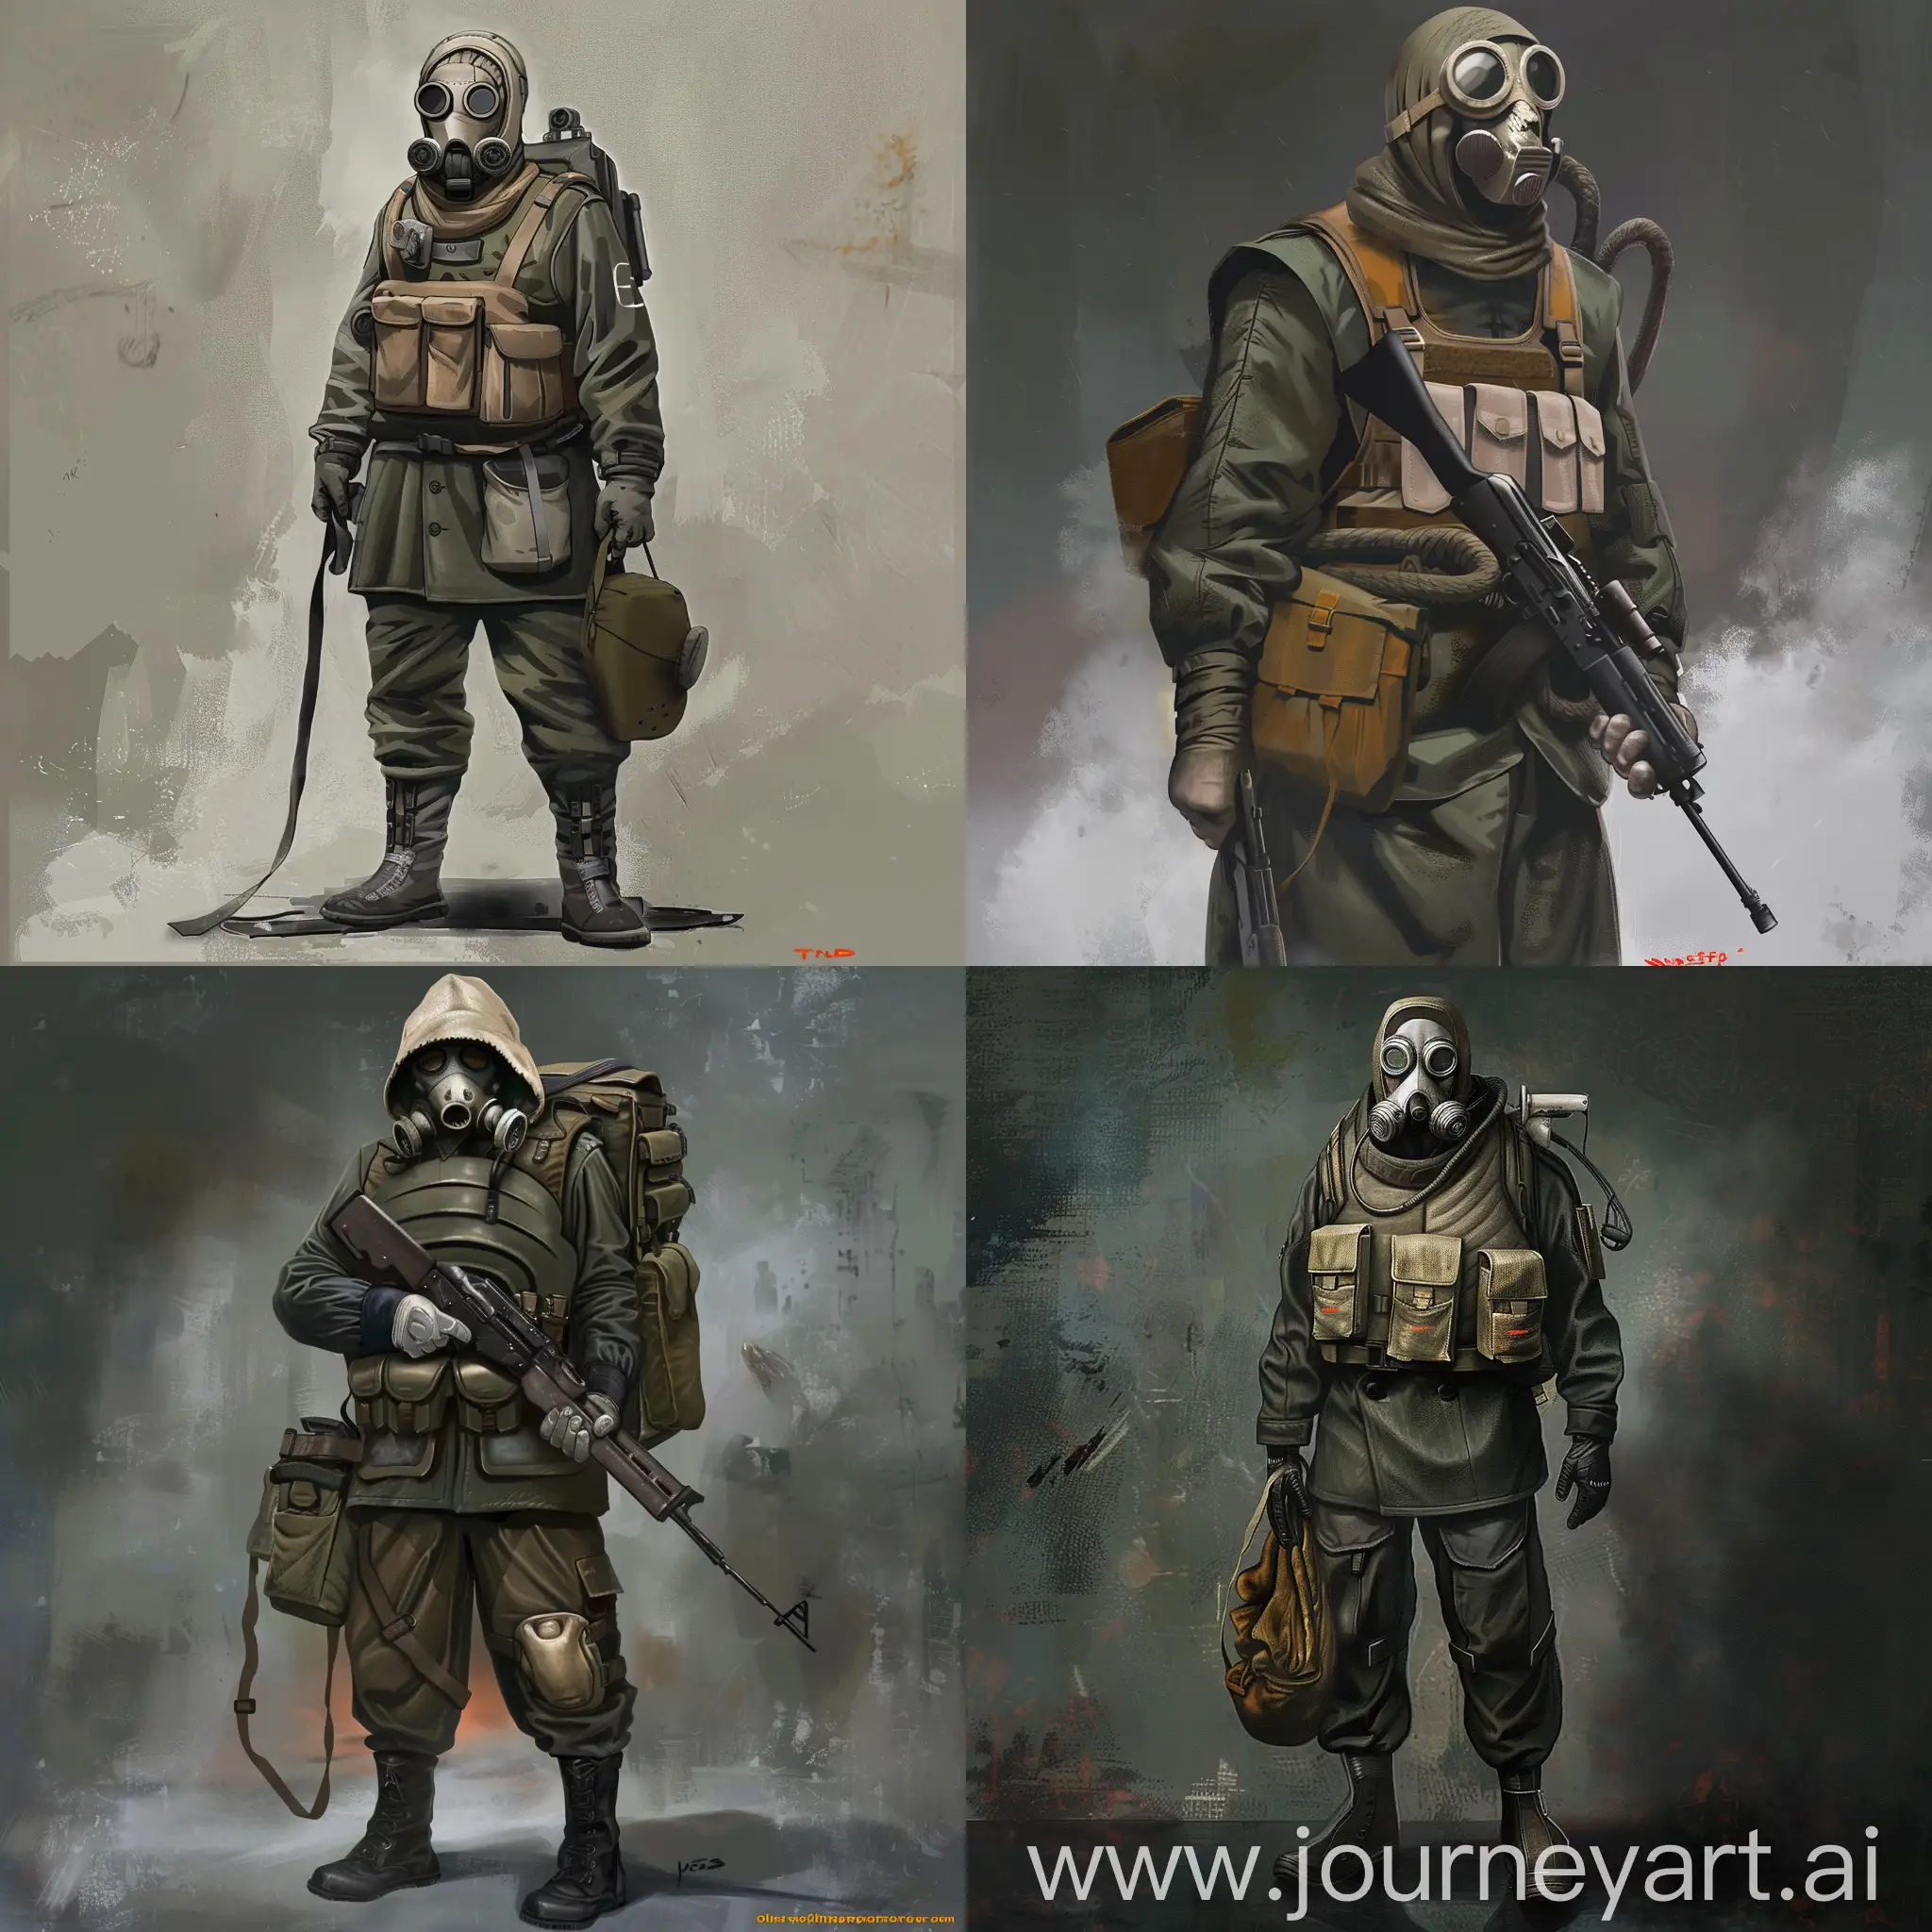 Concept-Art-of-Hansa-Faction-Soldier-from-Metro-2033-Game